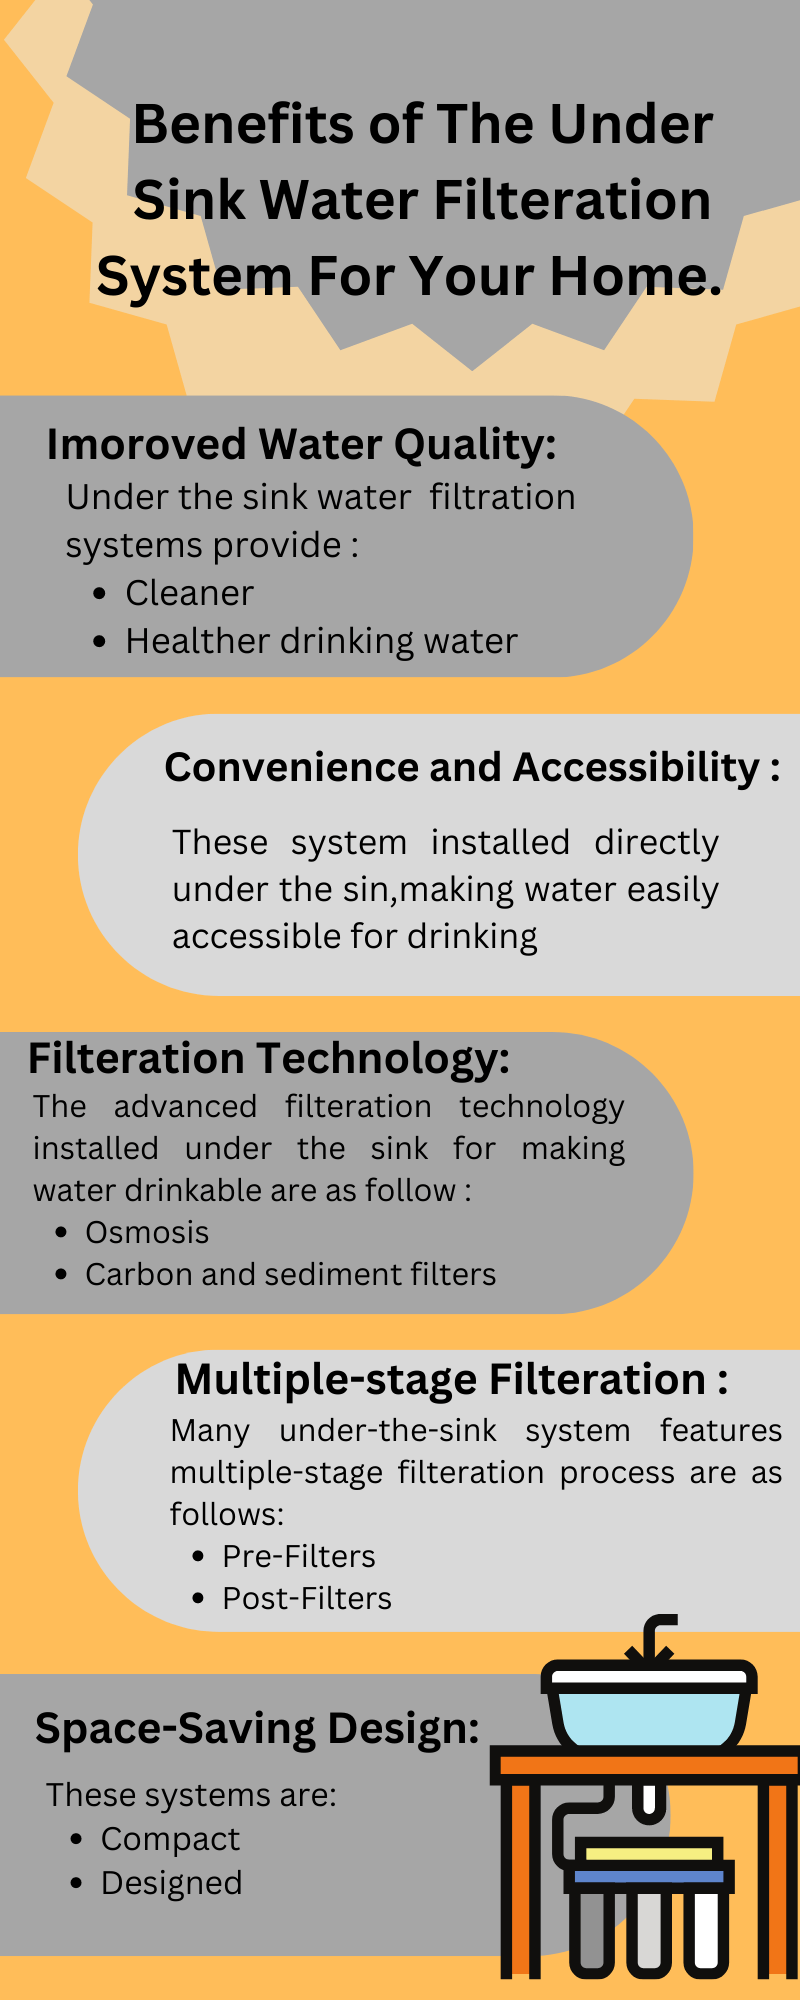 The Best Under The Sink Water Filteration System For Your Home - infographic